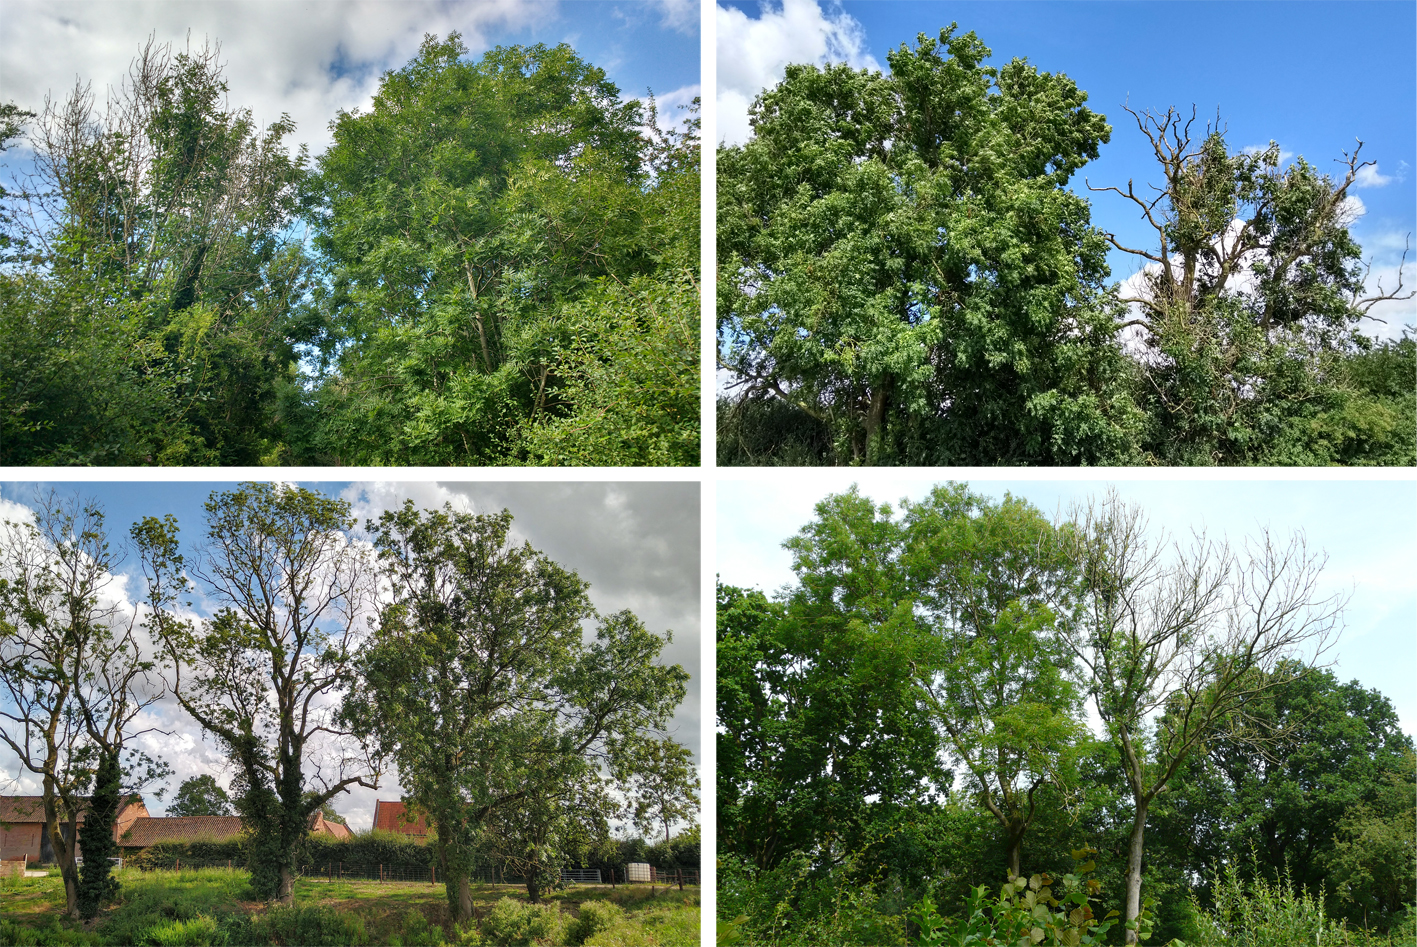 Request for help to save our local ash trees